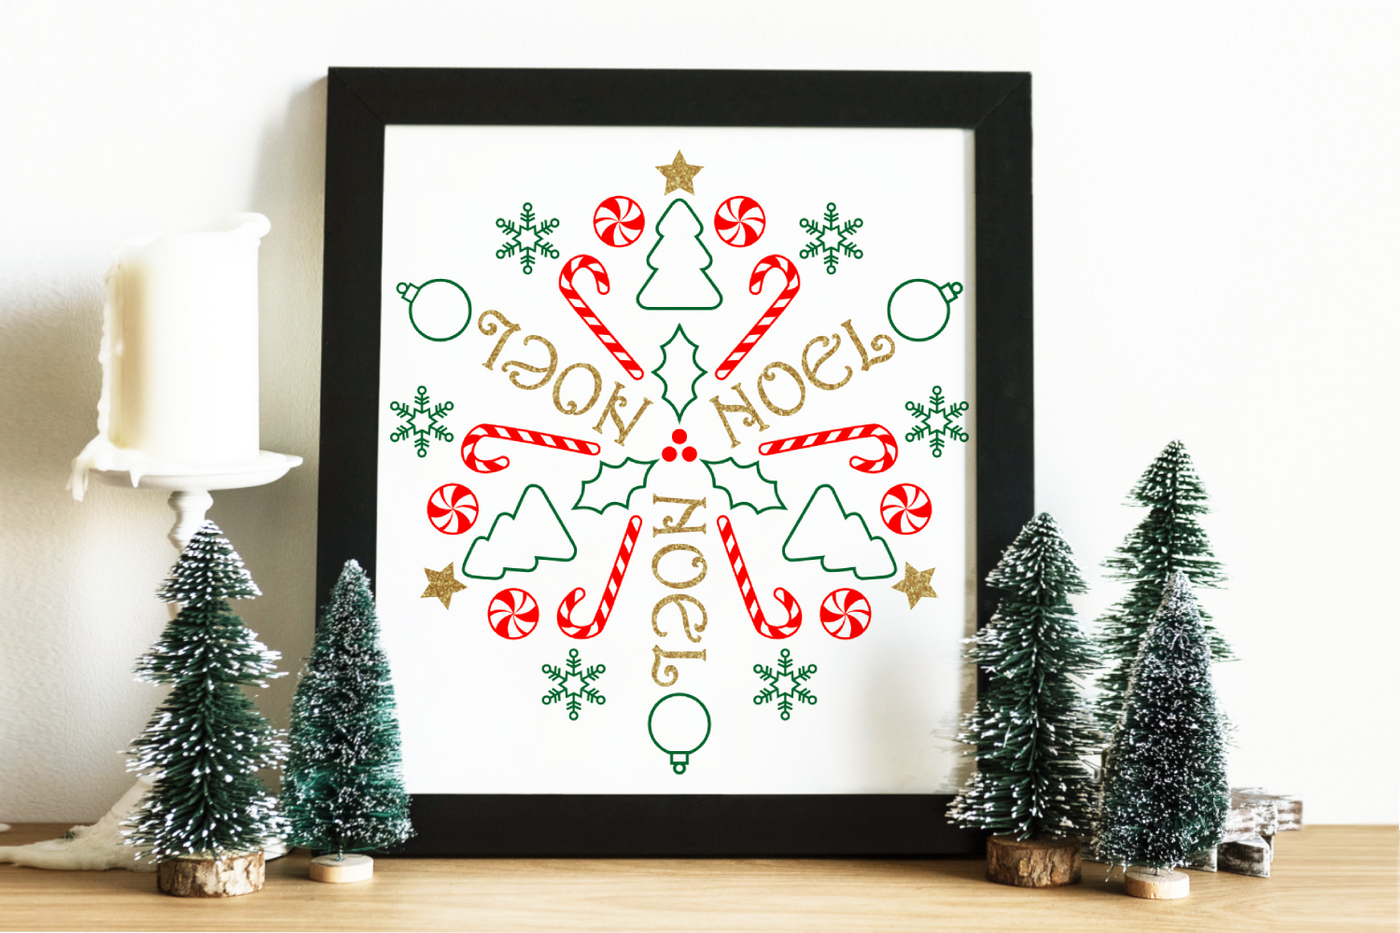 A square framed poster sits on a table with mini Christmas trees to either side. The poster has gold, red, and green Christmas symbols and the word NOEL in a circular repeat.